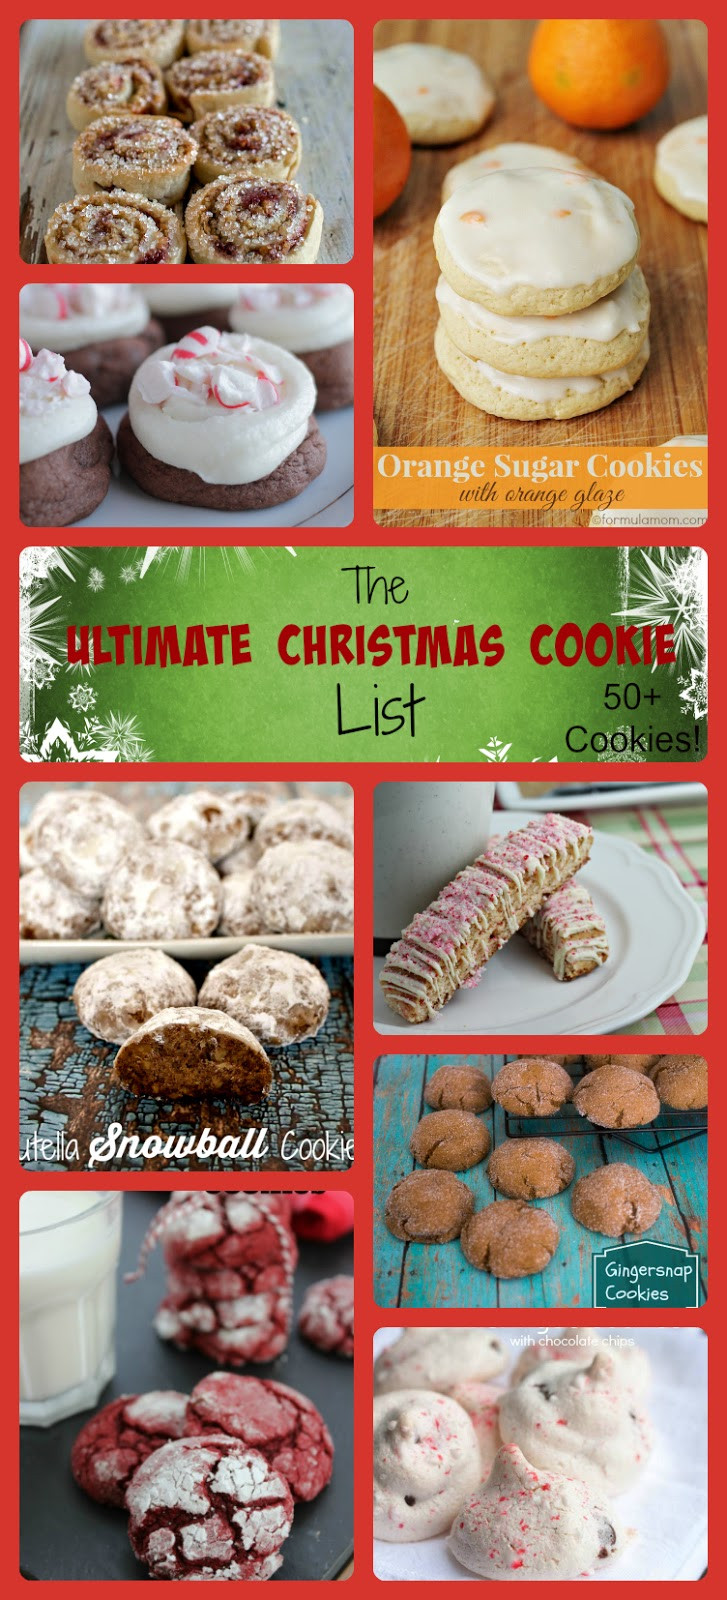 List Of Christmas Cookies
 Hello Happy Place The Ultimate Christmas Cookie List